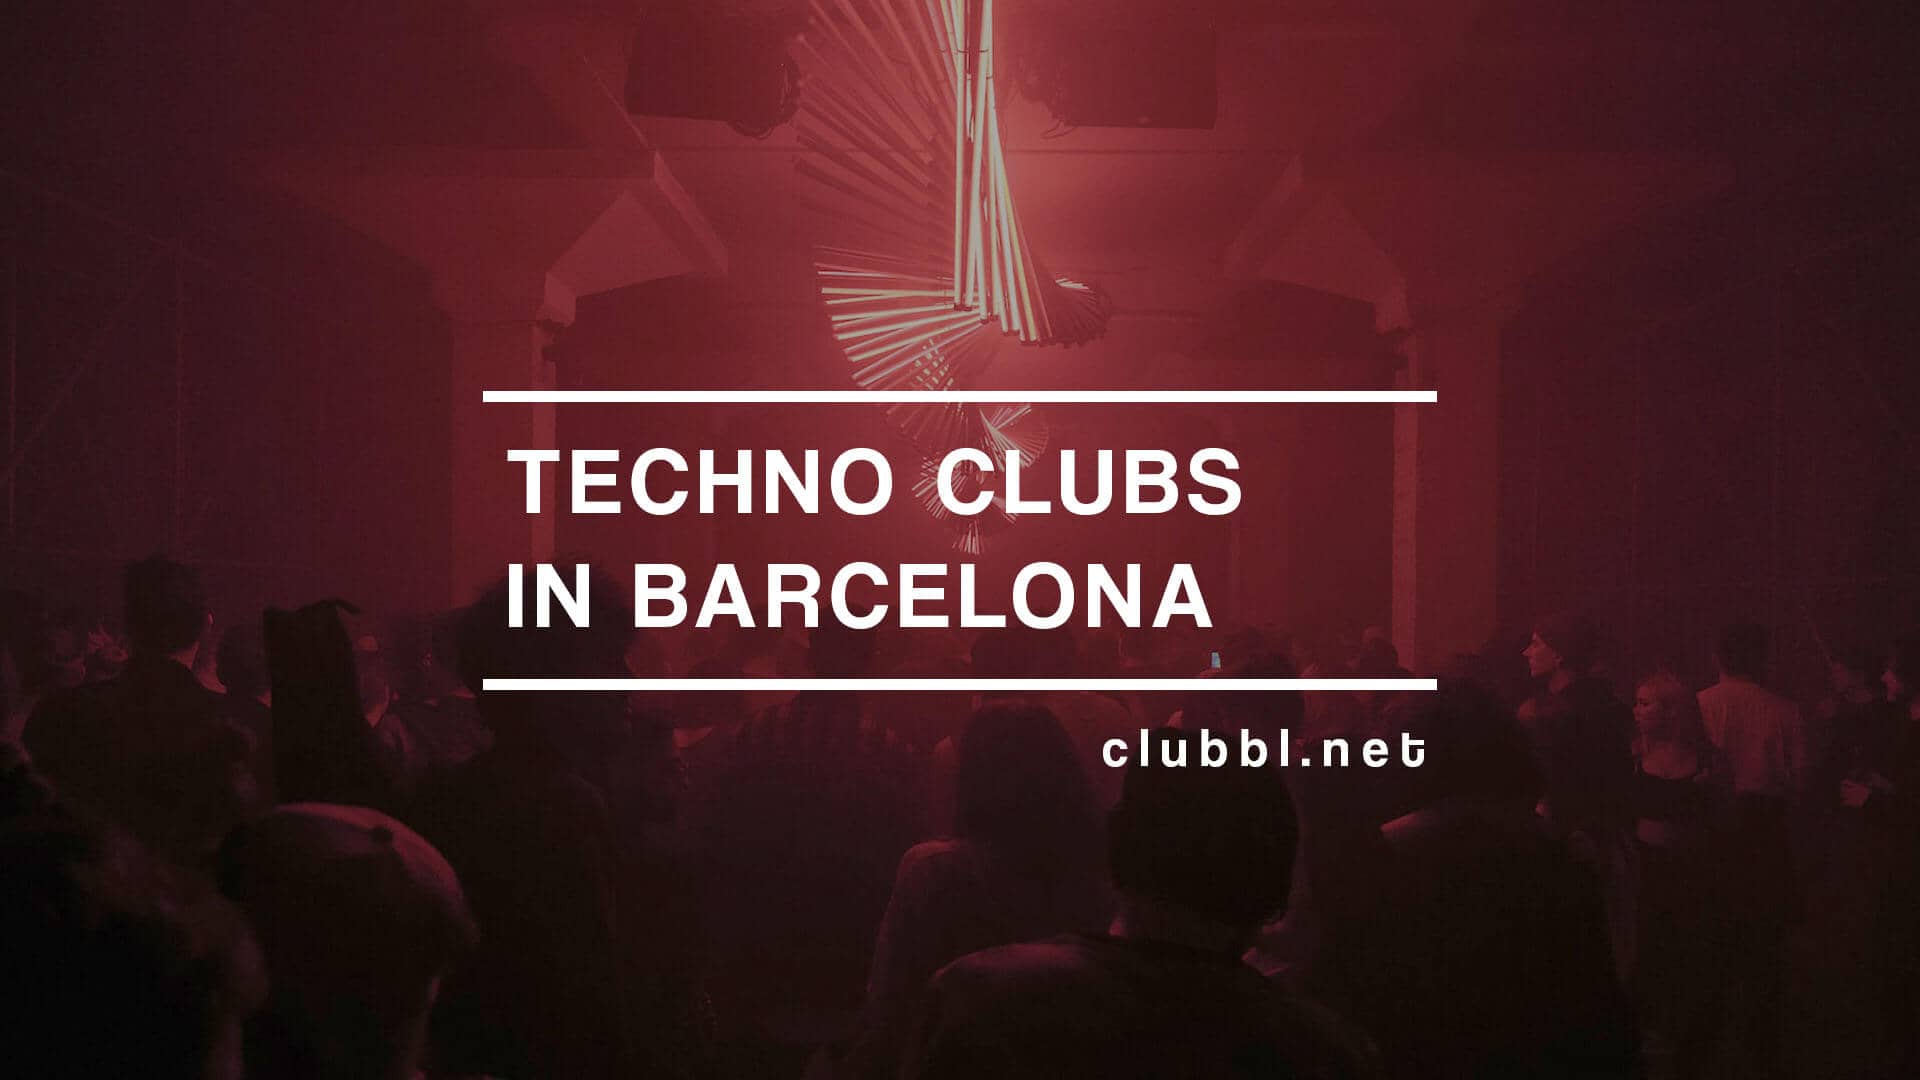 Discover the Techno Clubs in Barcelona and enjoy nightlife and techno scene in the city